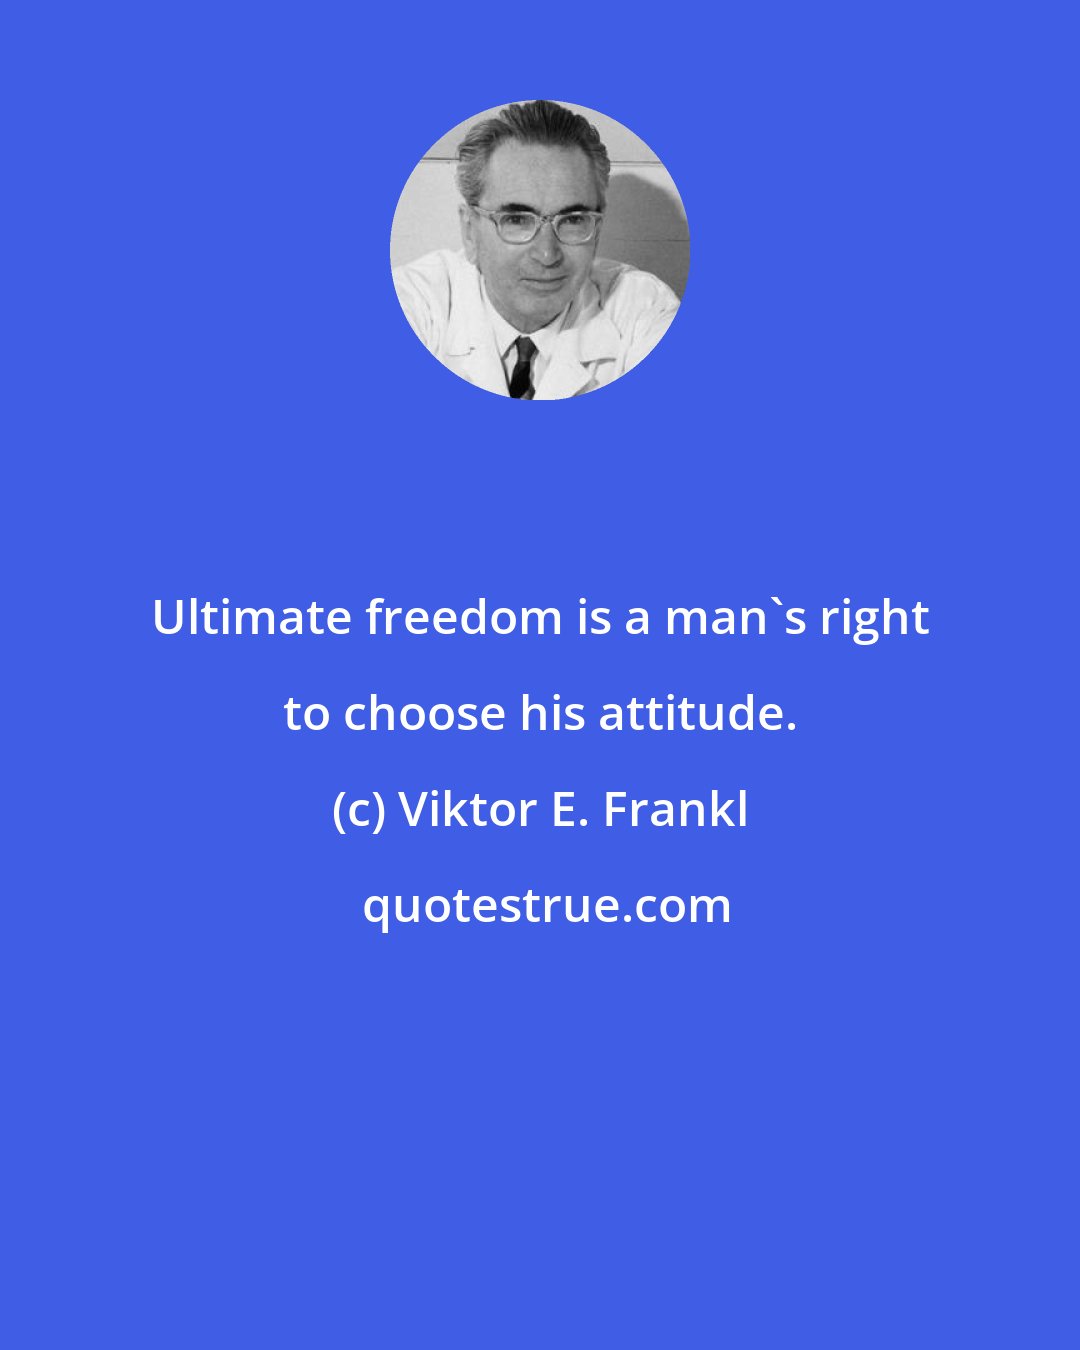 Viktor E. Frankl: Ultimate freedom is a man's right to choose his attitude.